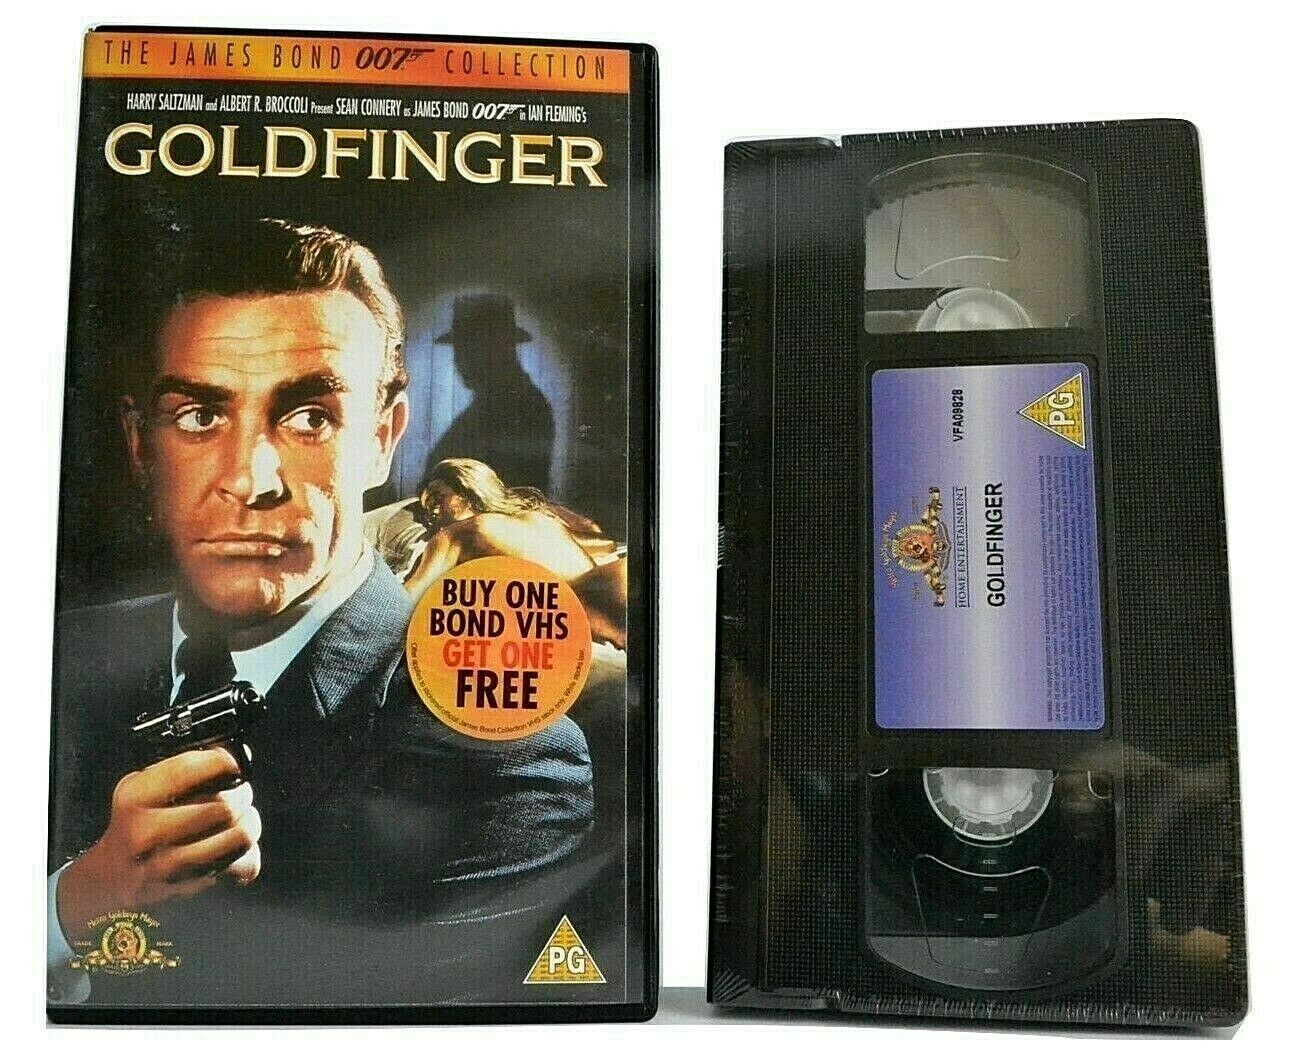 Goldfinger (1964): James Bond Collection - Brand New Sealed - Sean Connery - VHS-